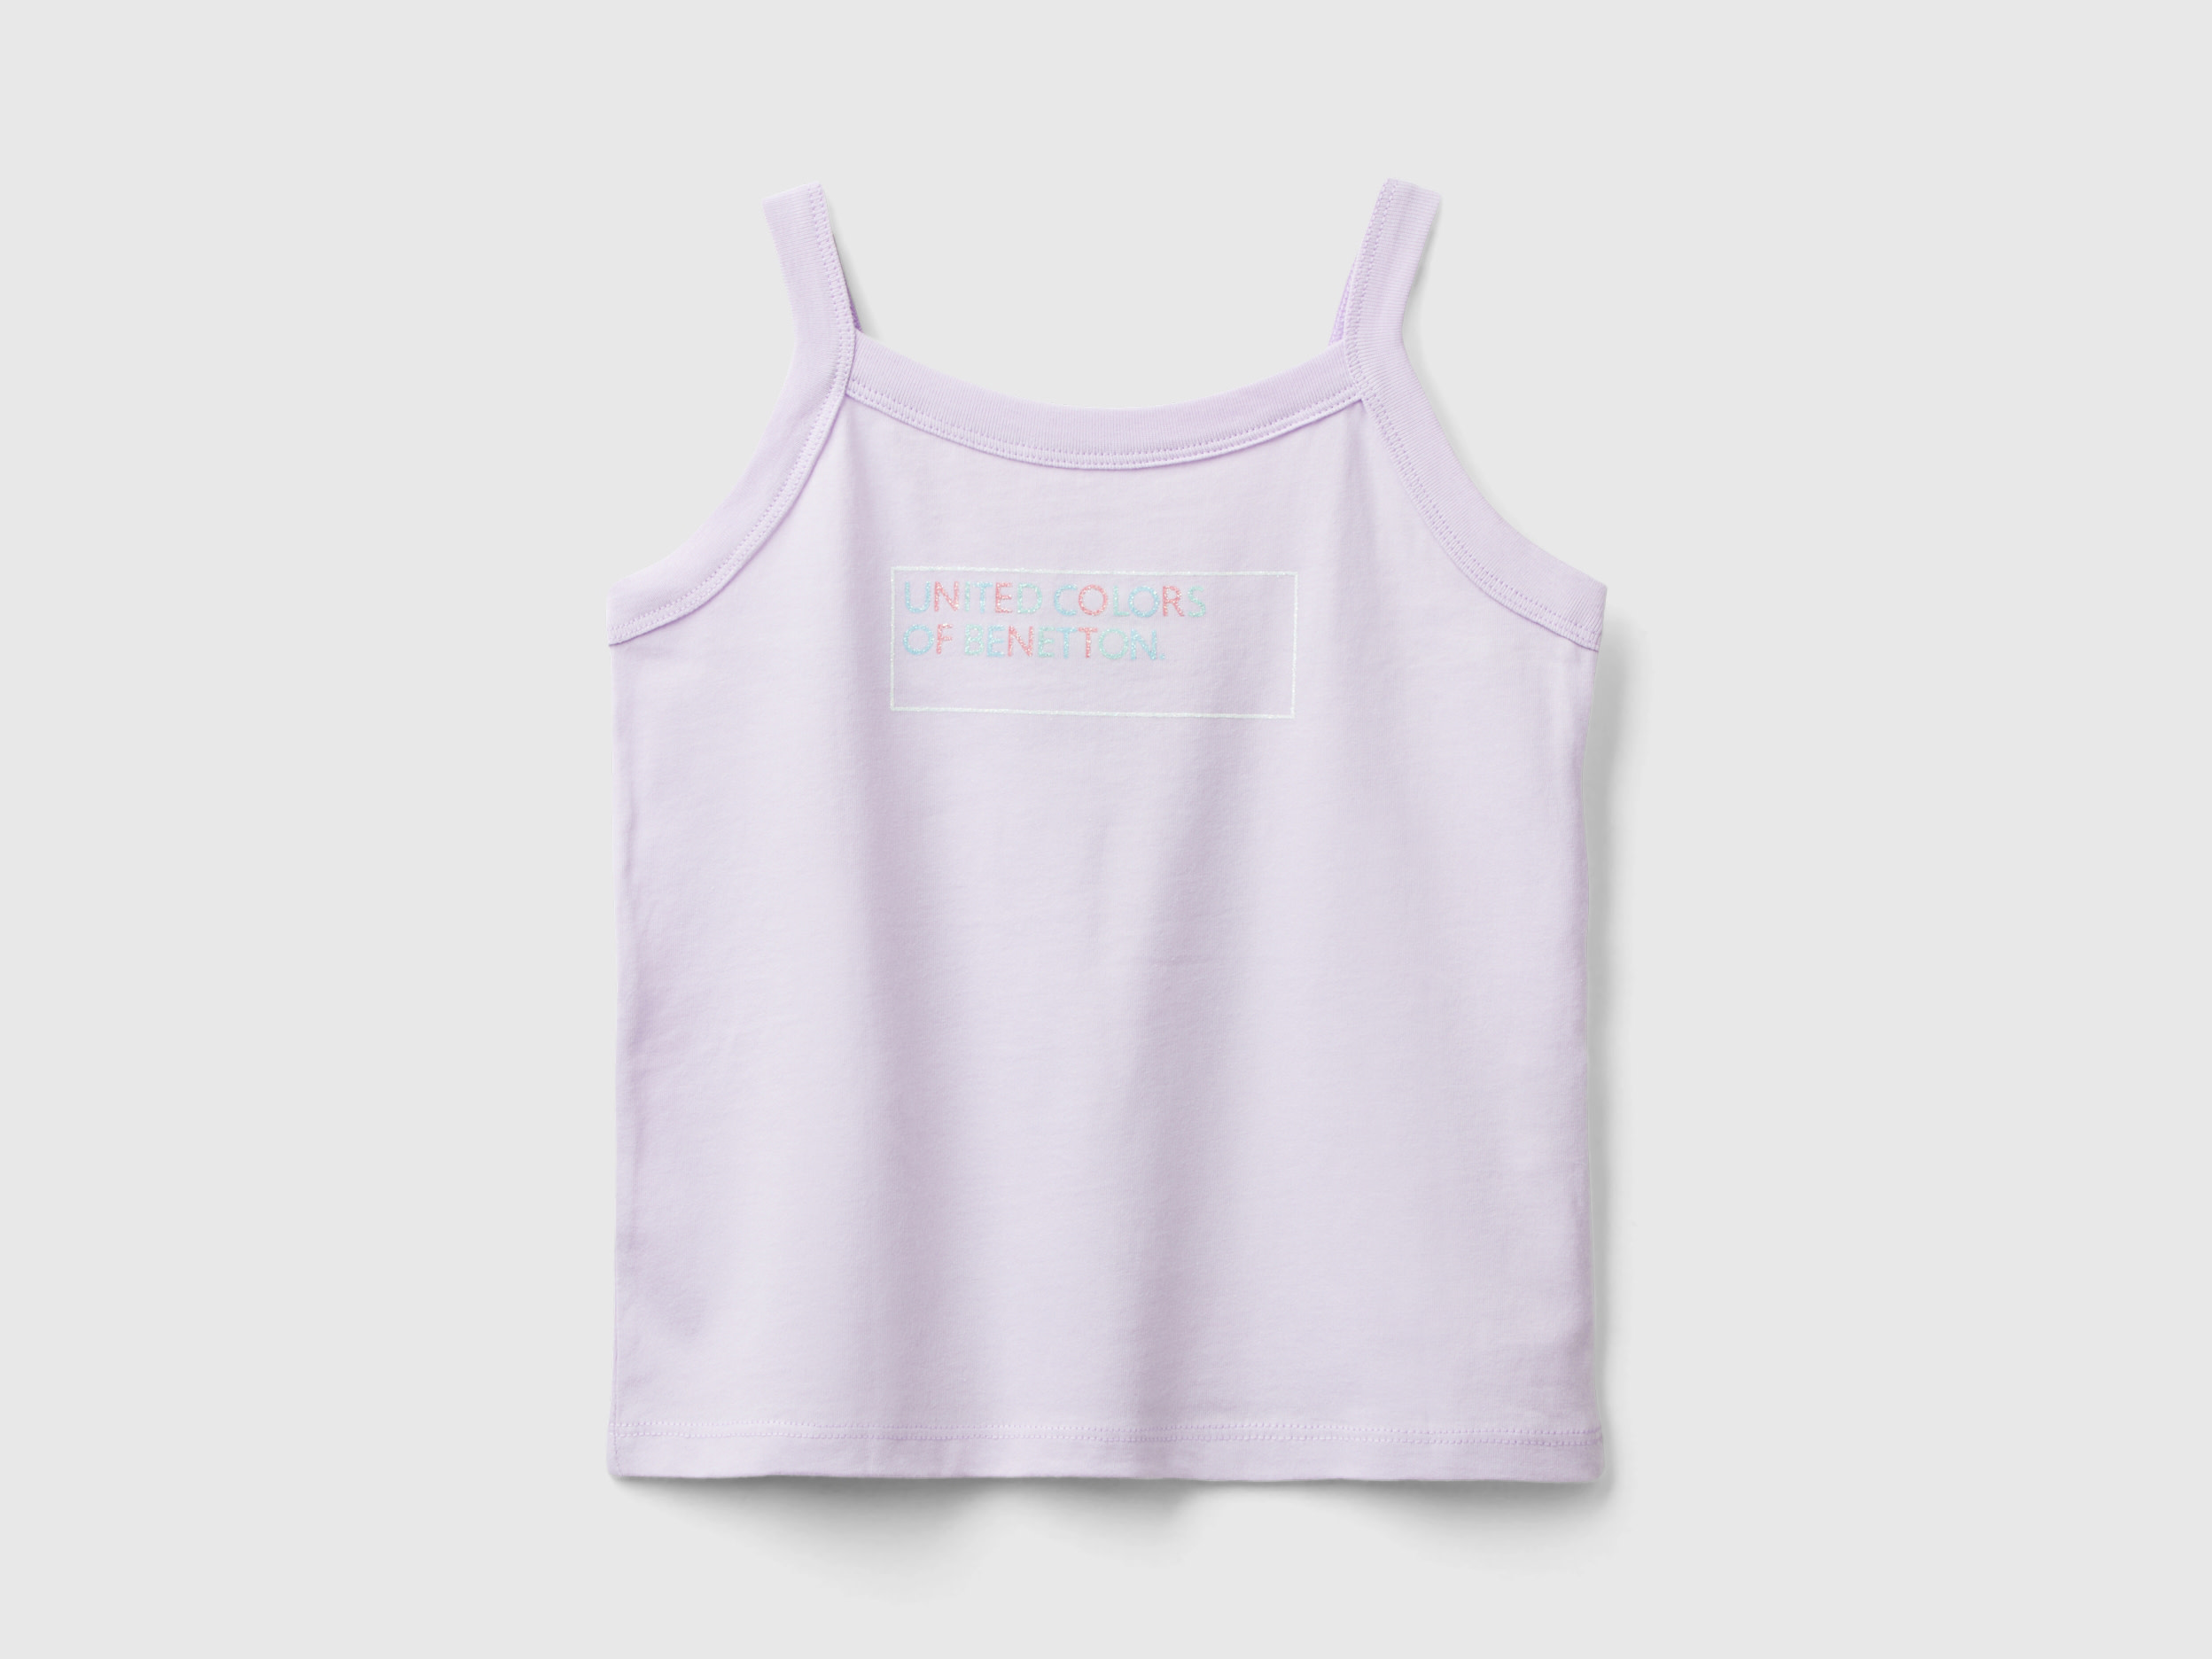 Image of Benetton, Tank Top With Glittery Logo Print, size XL, Lilac, Kids